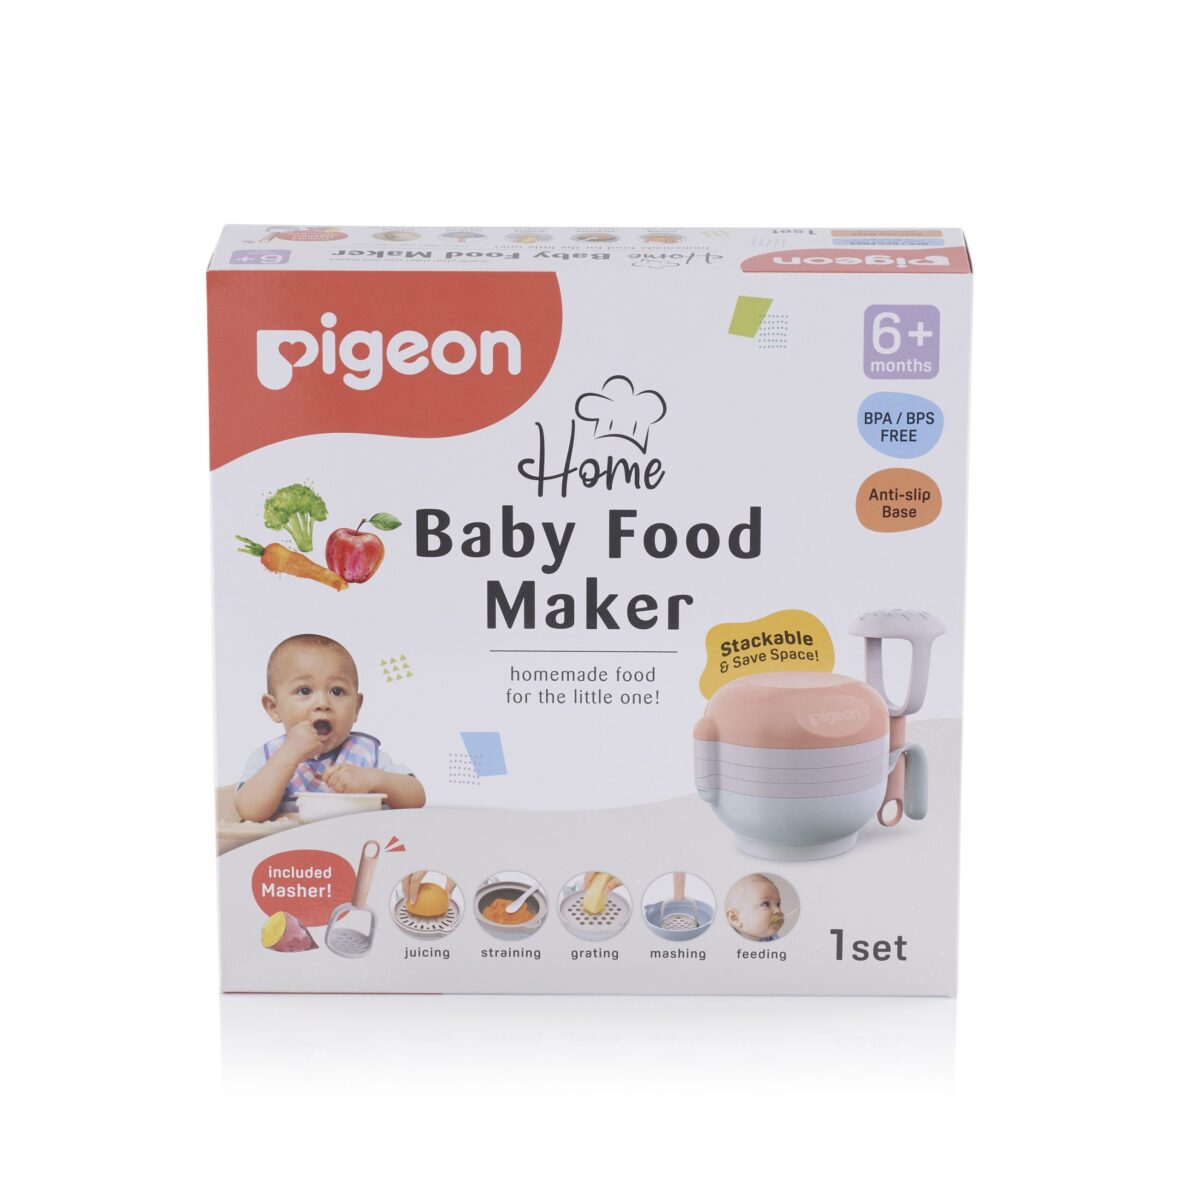 78416_Home-Baby-Food-Maker_Packaging-Front-3000×3000-1-scaled-1-1